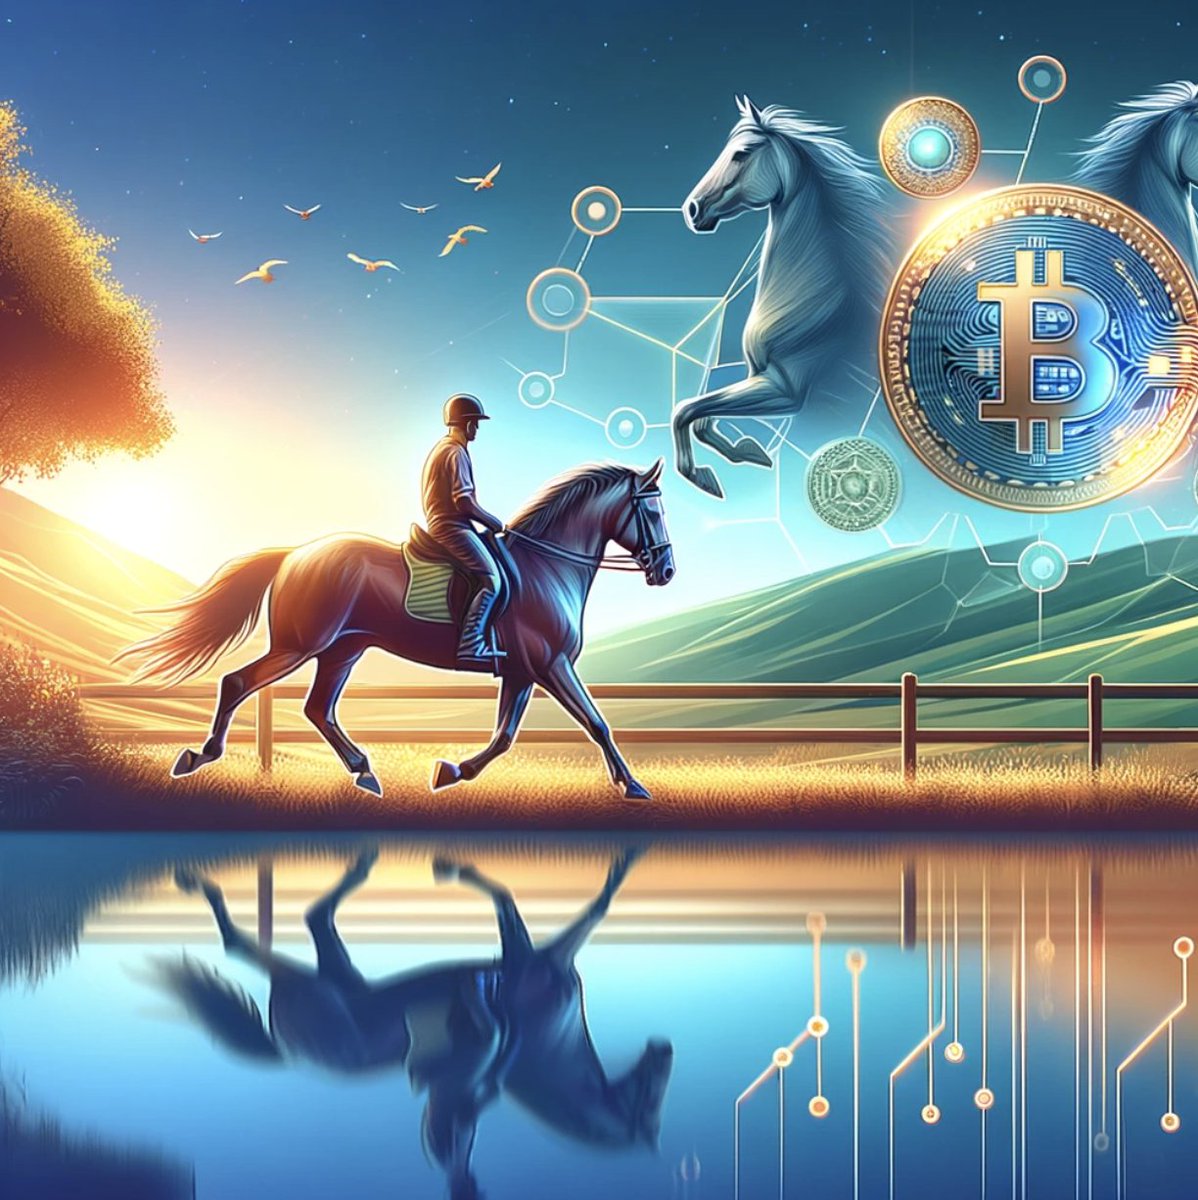 Every ride changes the horse, and at #GunnerCoin, we believe in positive transformation. 🐎💼 It's our mission to ensure that with every @base transaction, our community and technology improve for the better. Join us in shaping a brighter crypto future. 🚀 #ChangeForTheBetter